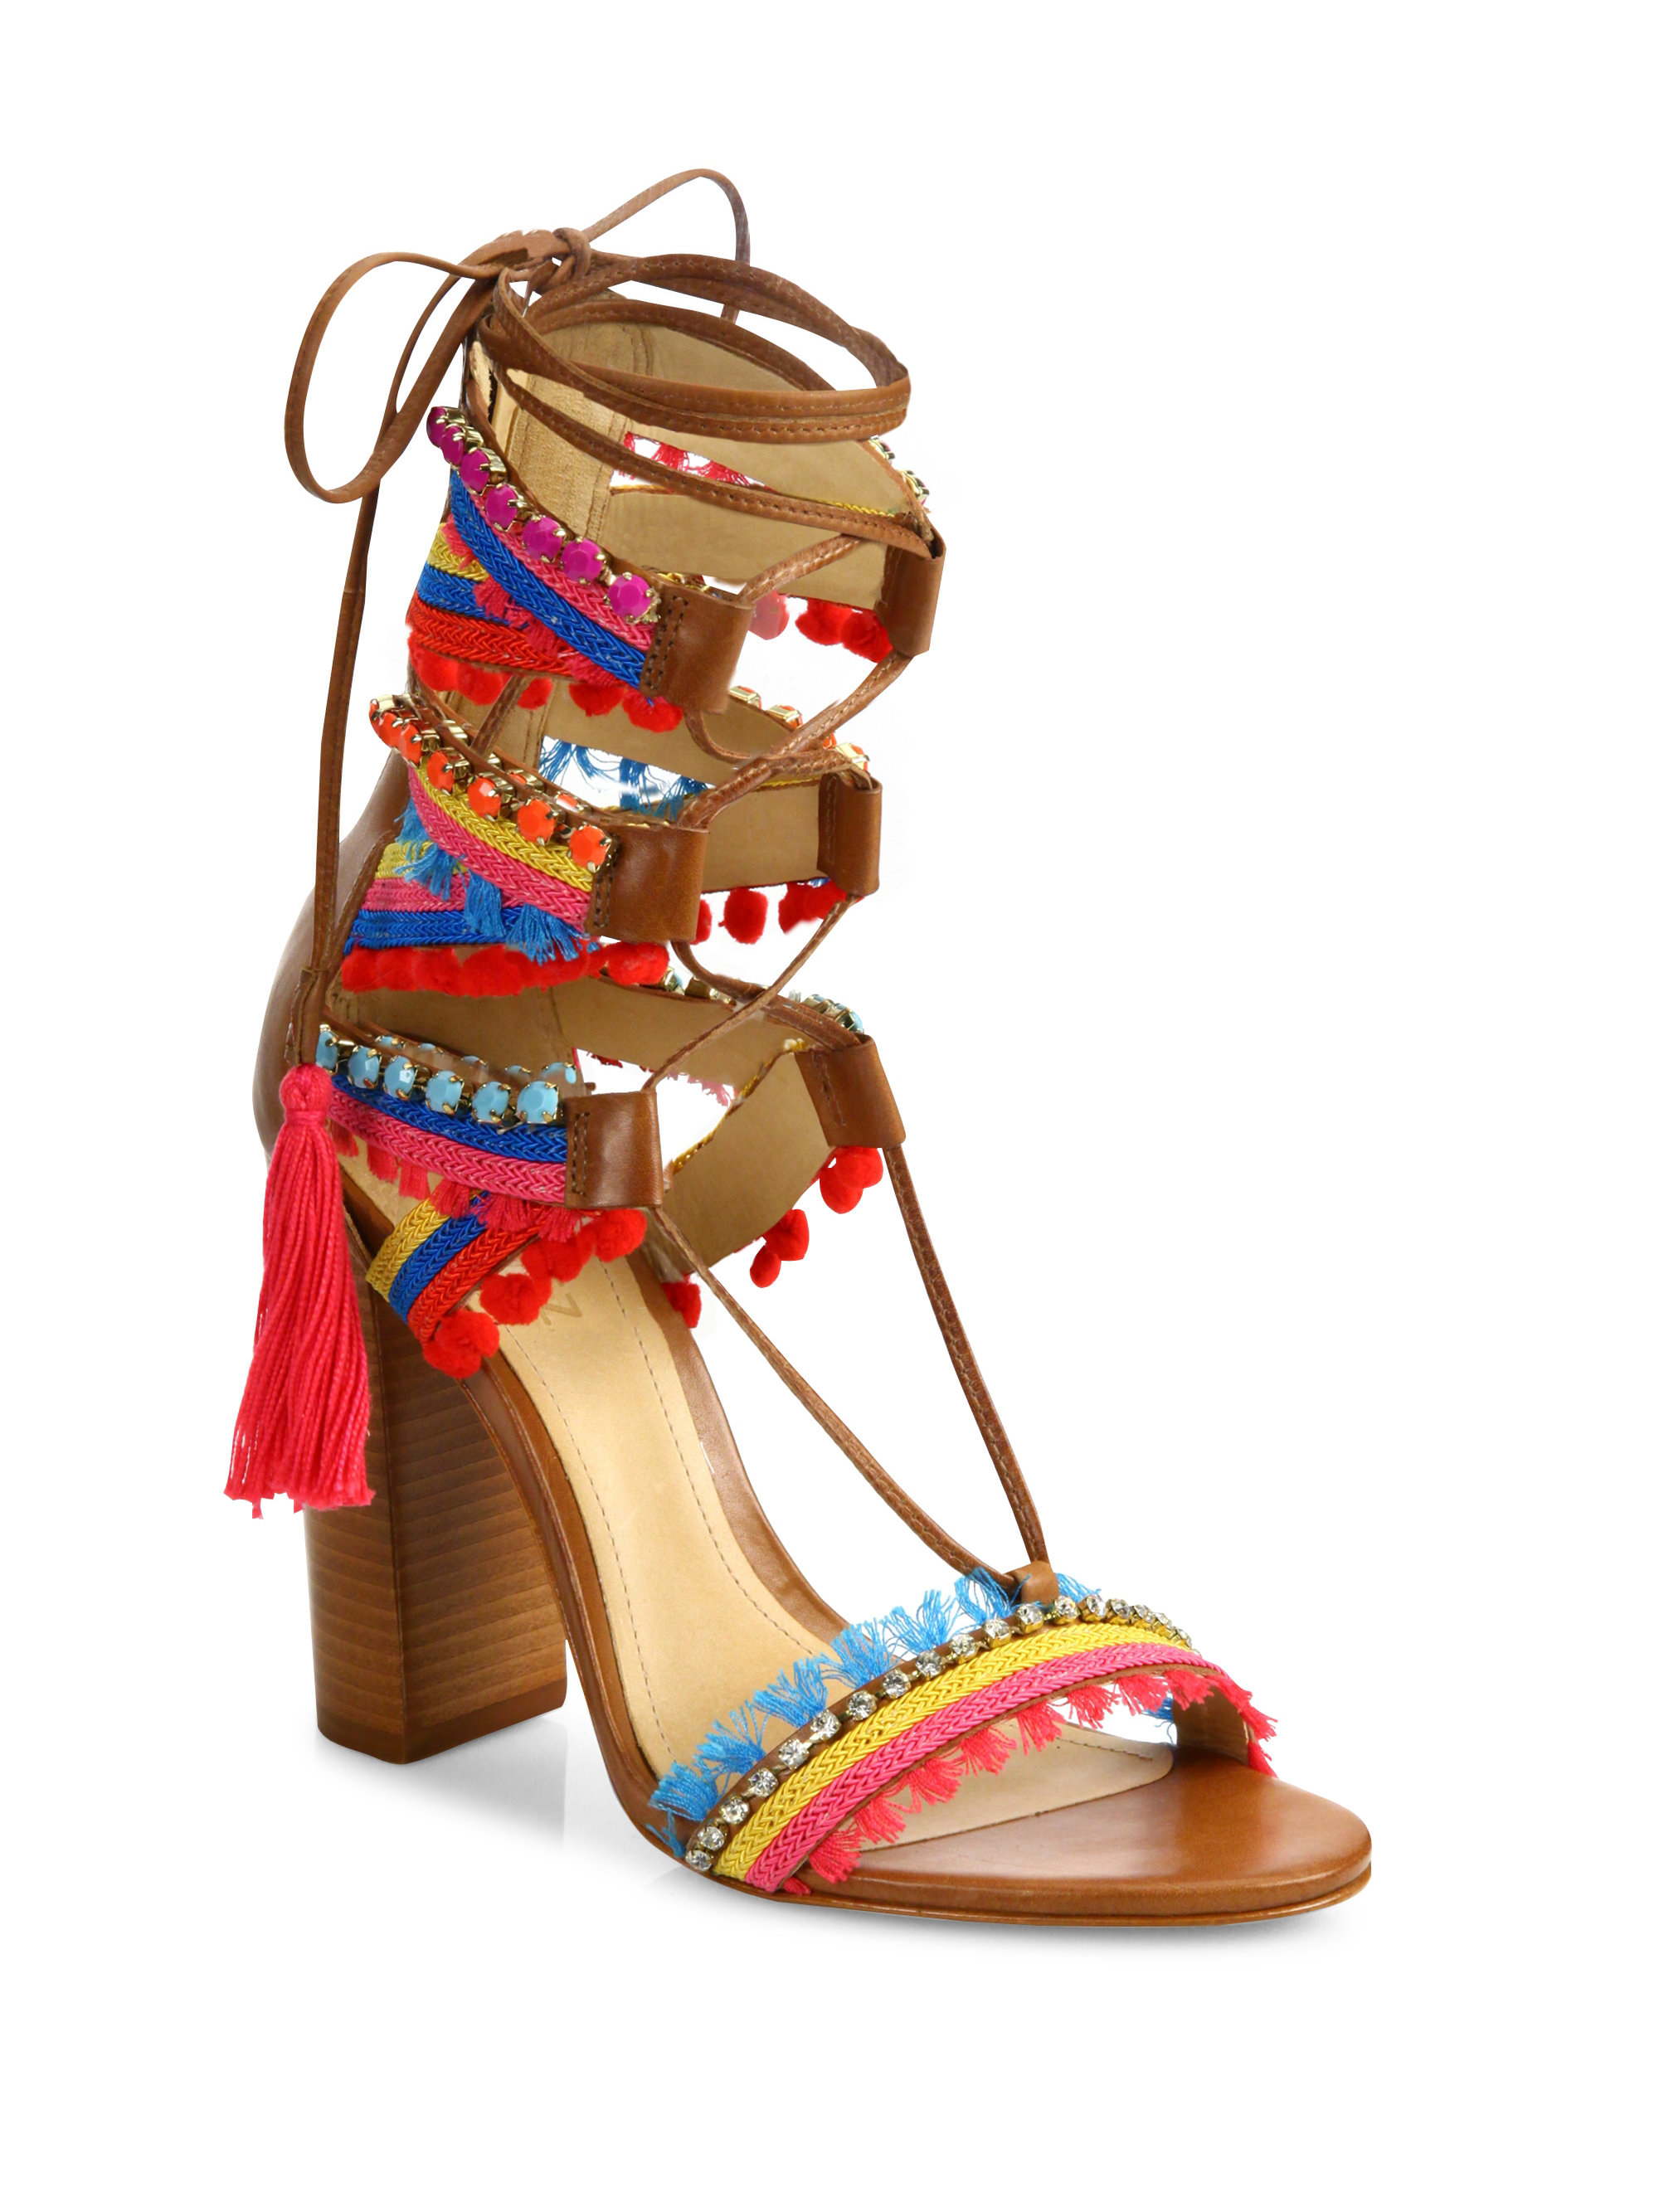 Buy > jeweled heeled sandals > in stock